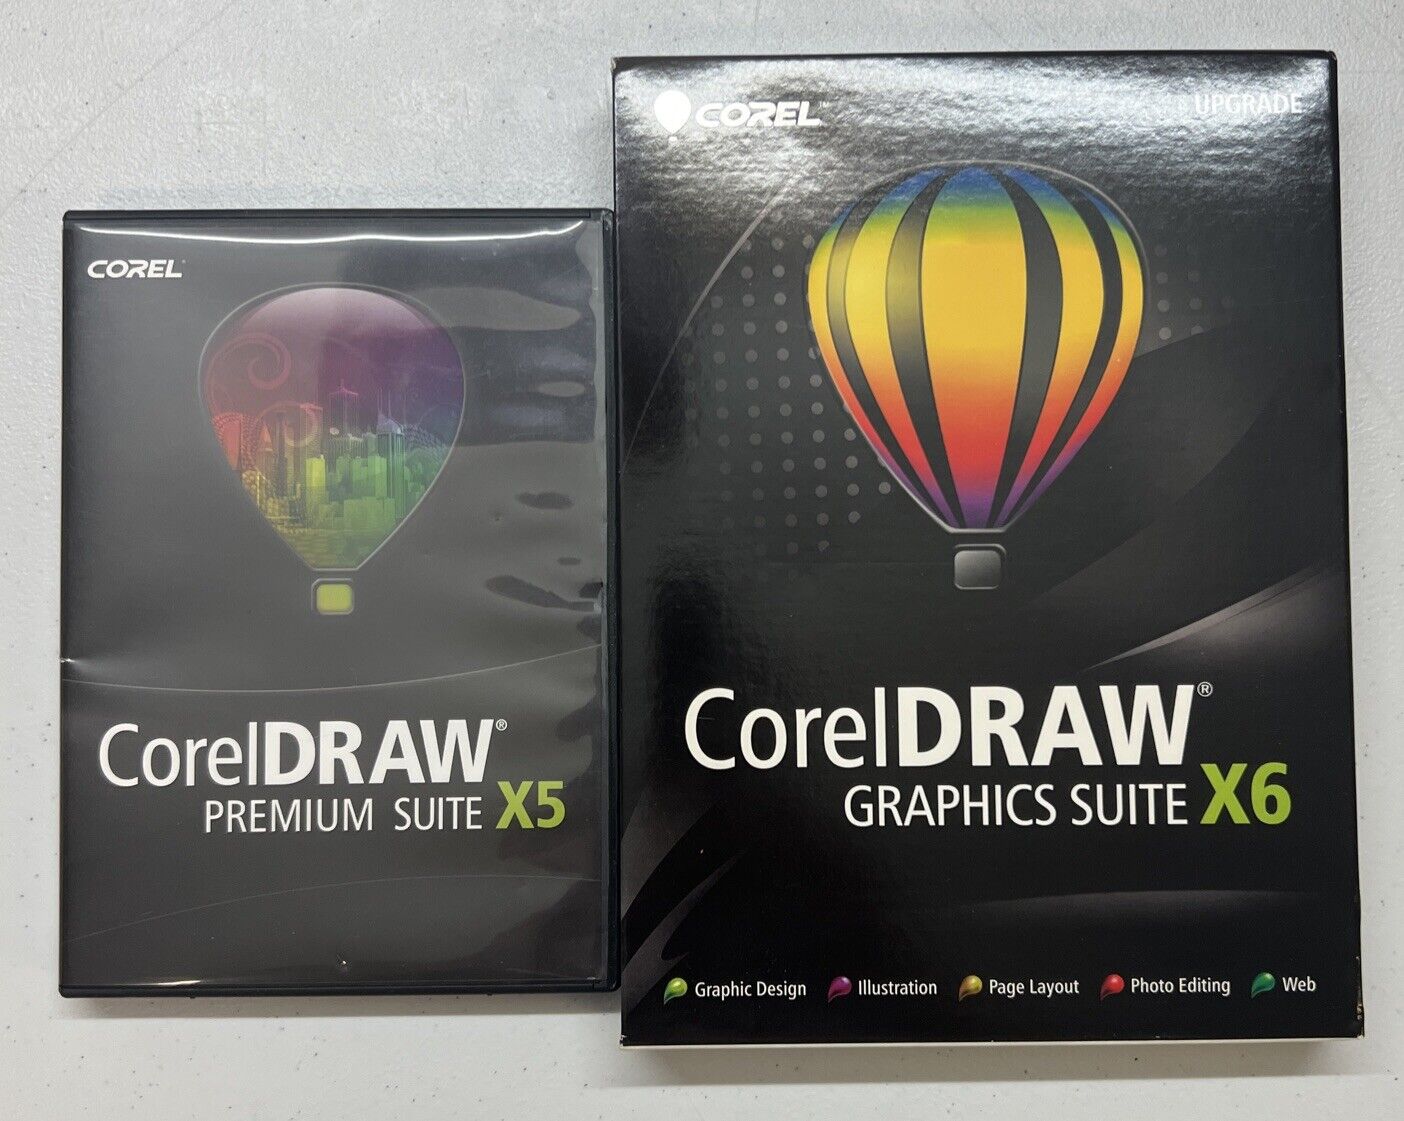 Corel Draw Graphics Suite X6 Upgrade Software Graphic Design Manual and Disc